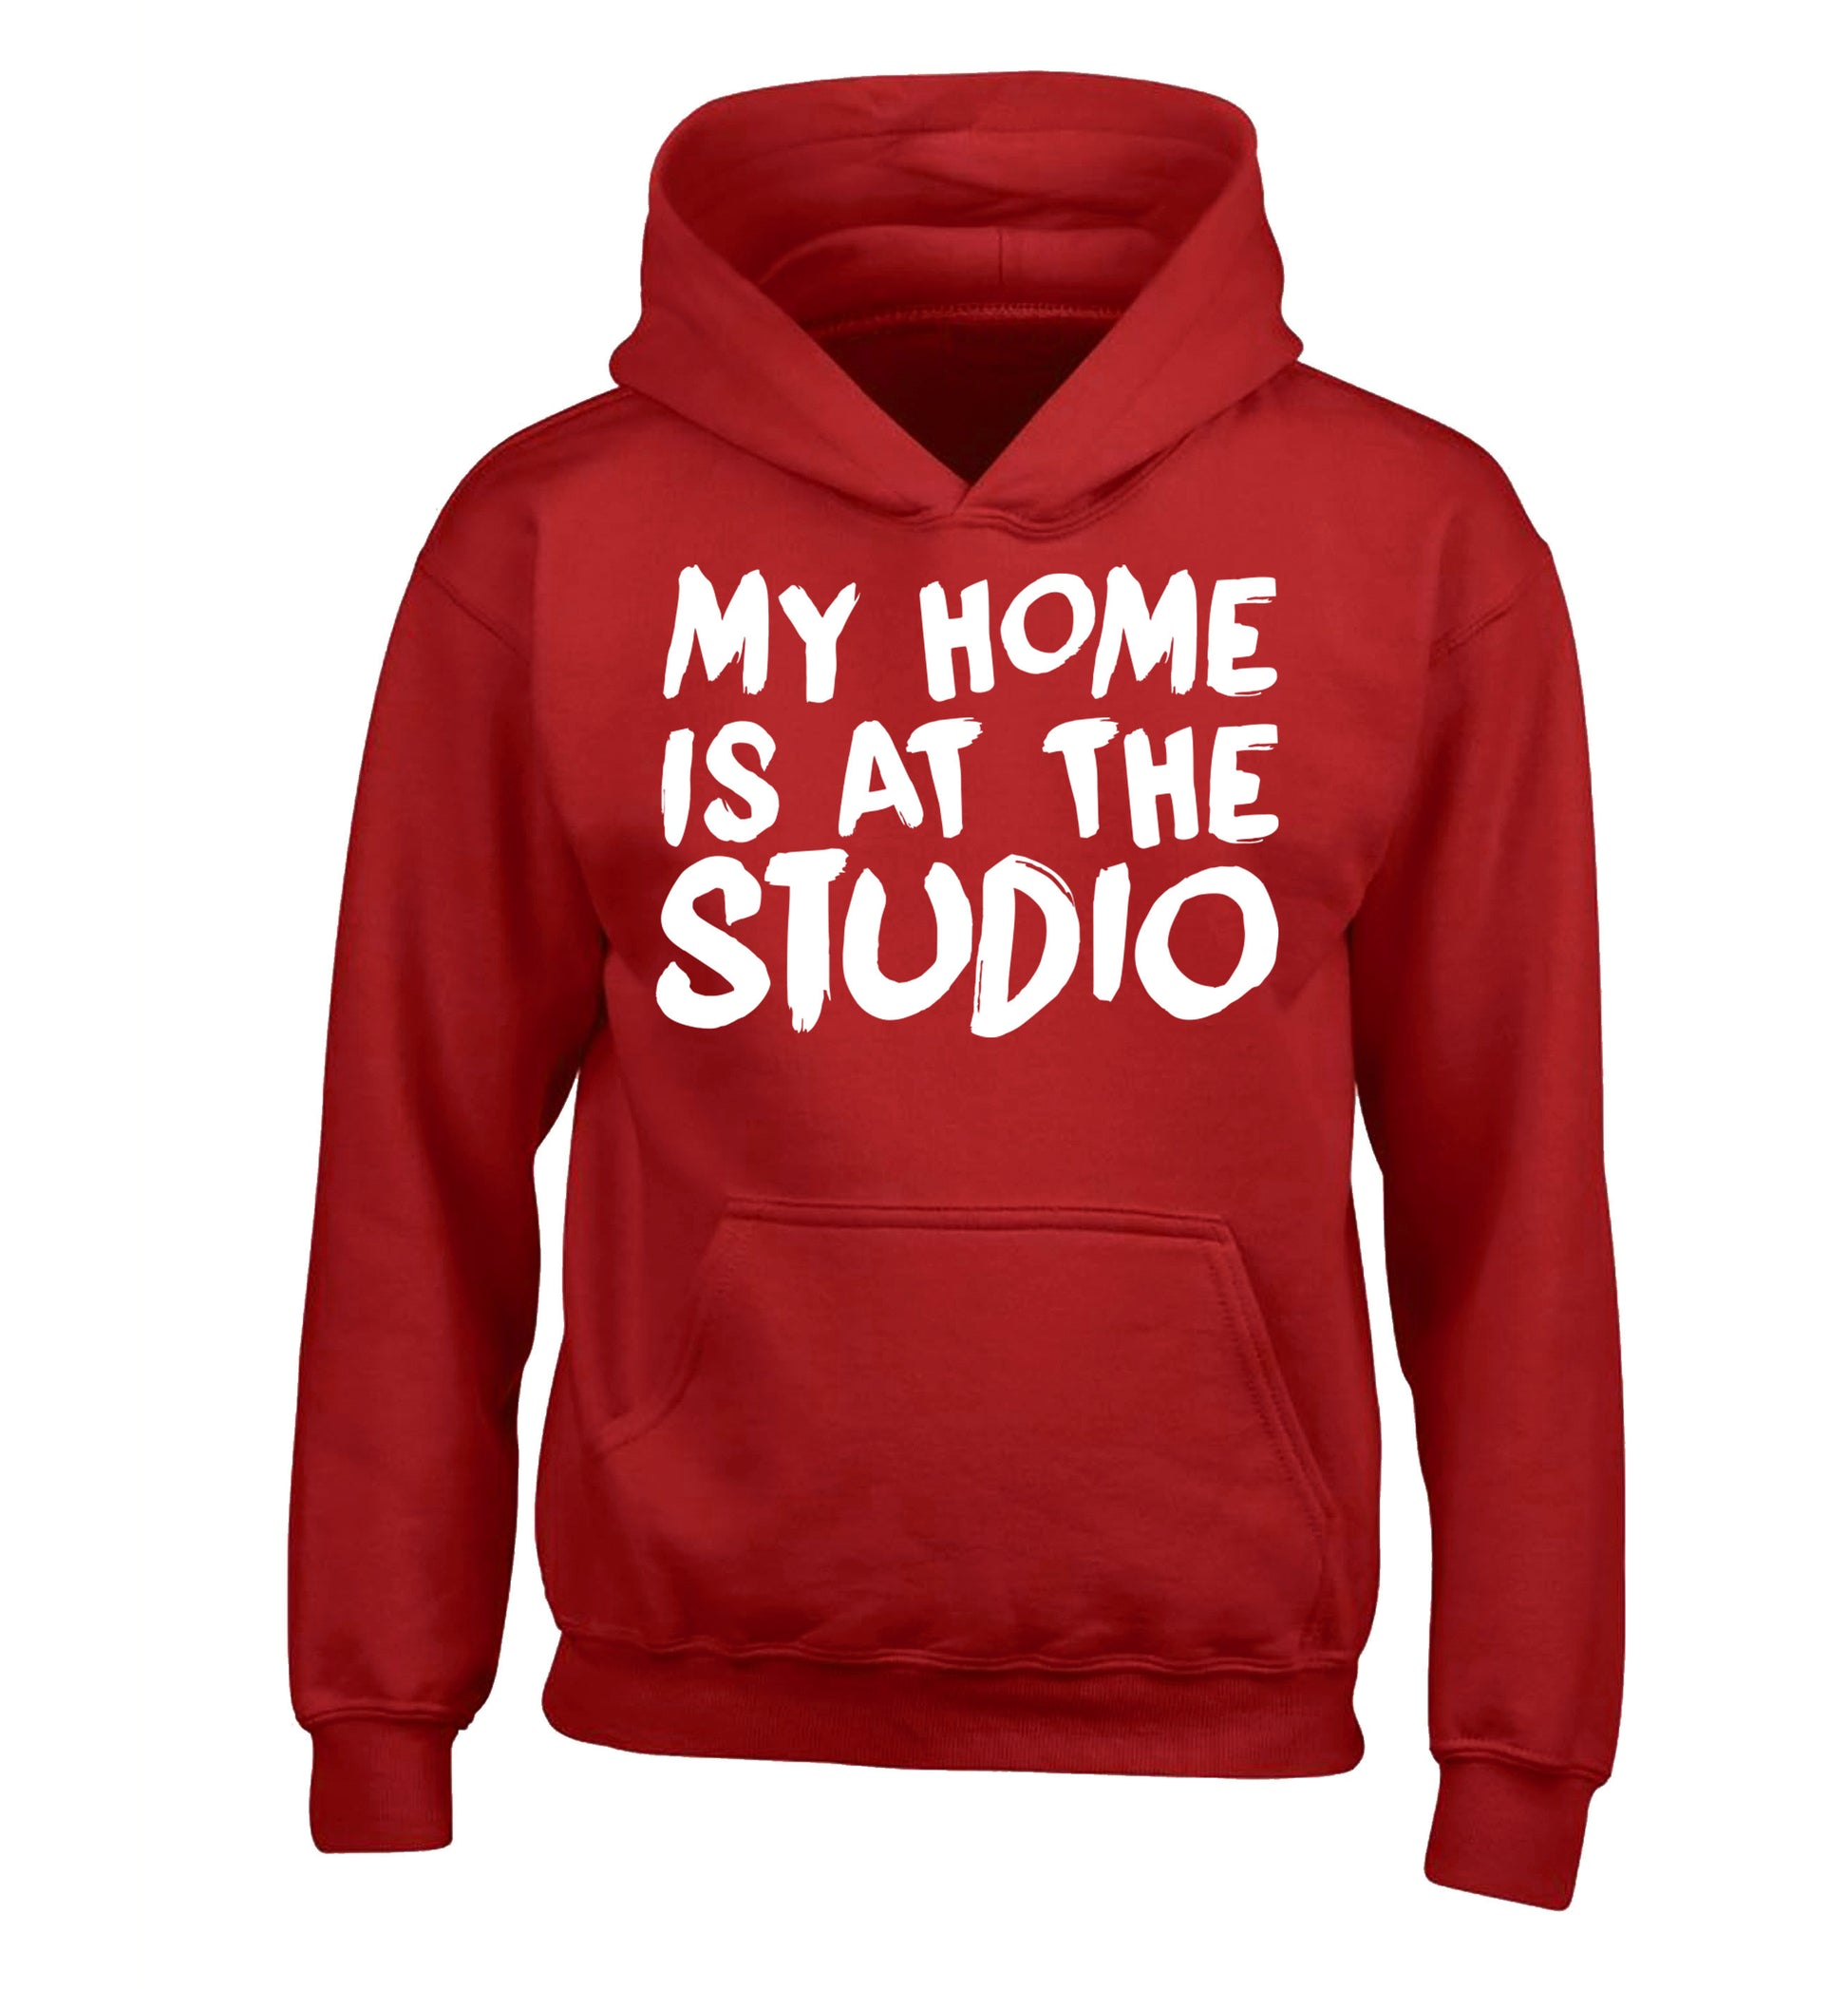 My home is at the studio children's red hoodie 12-14 Years